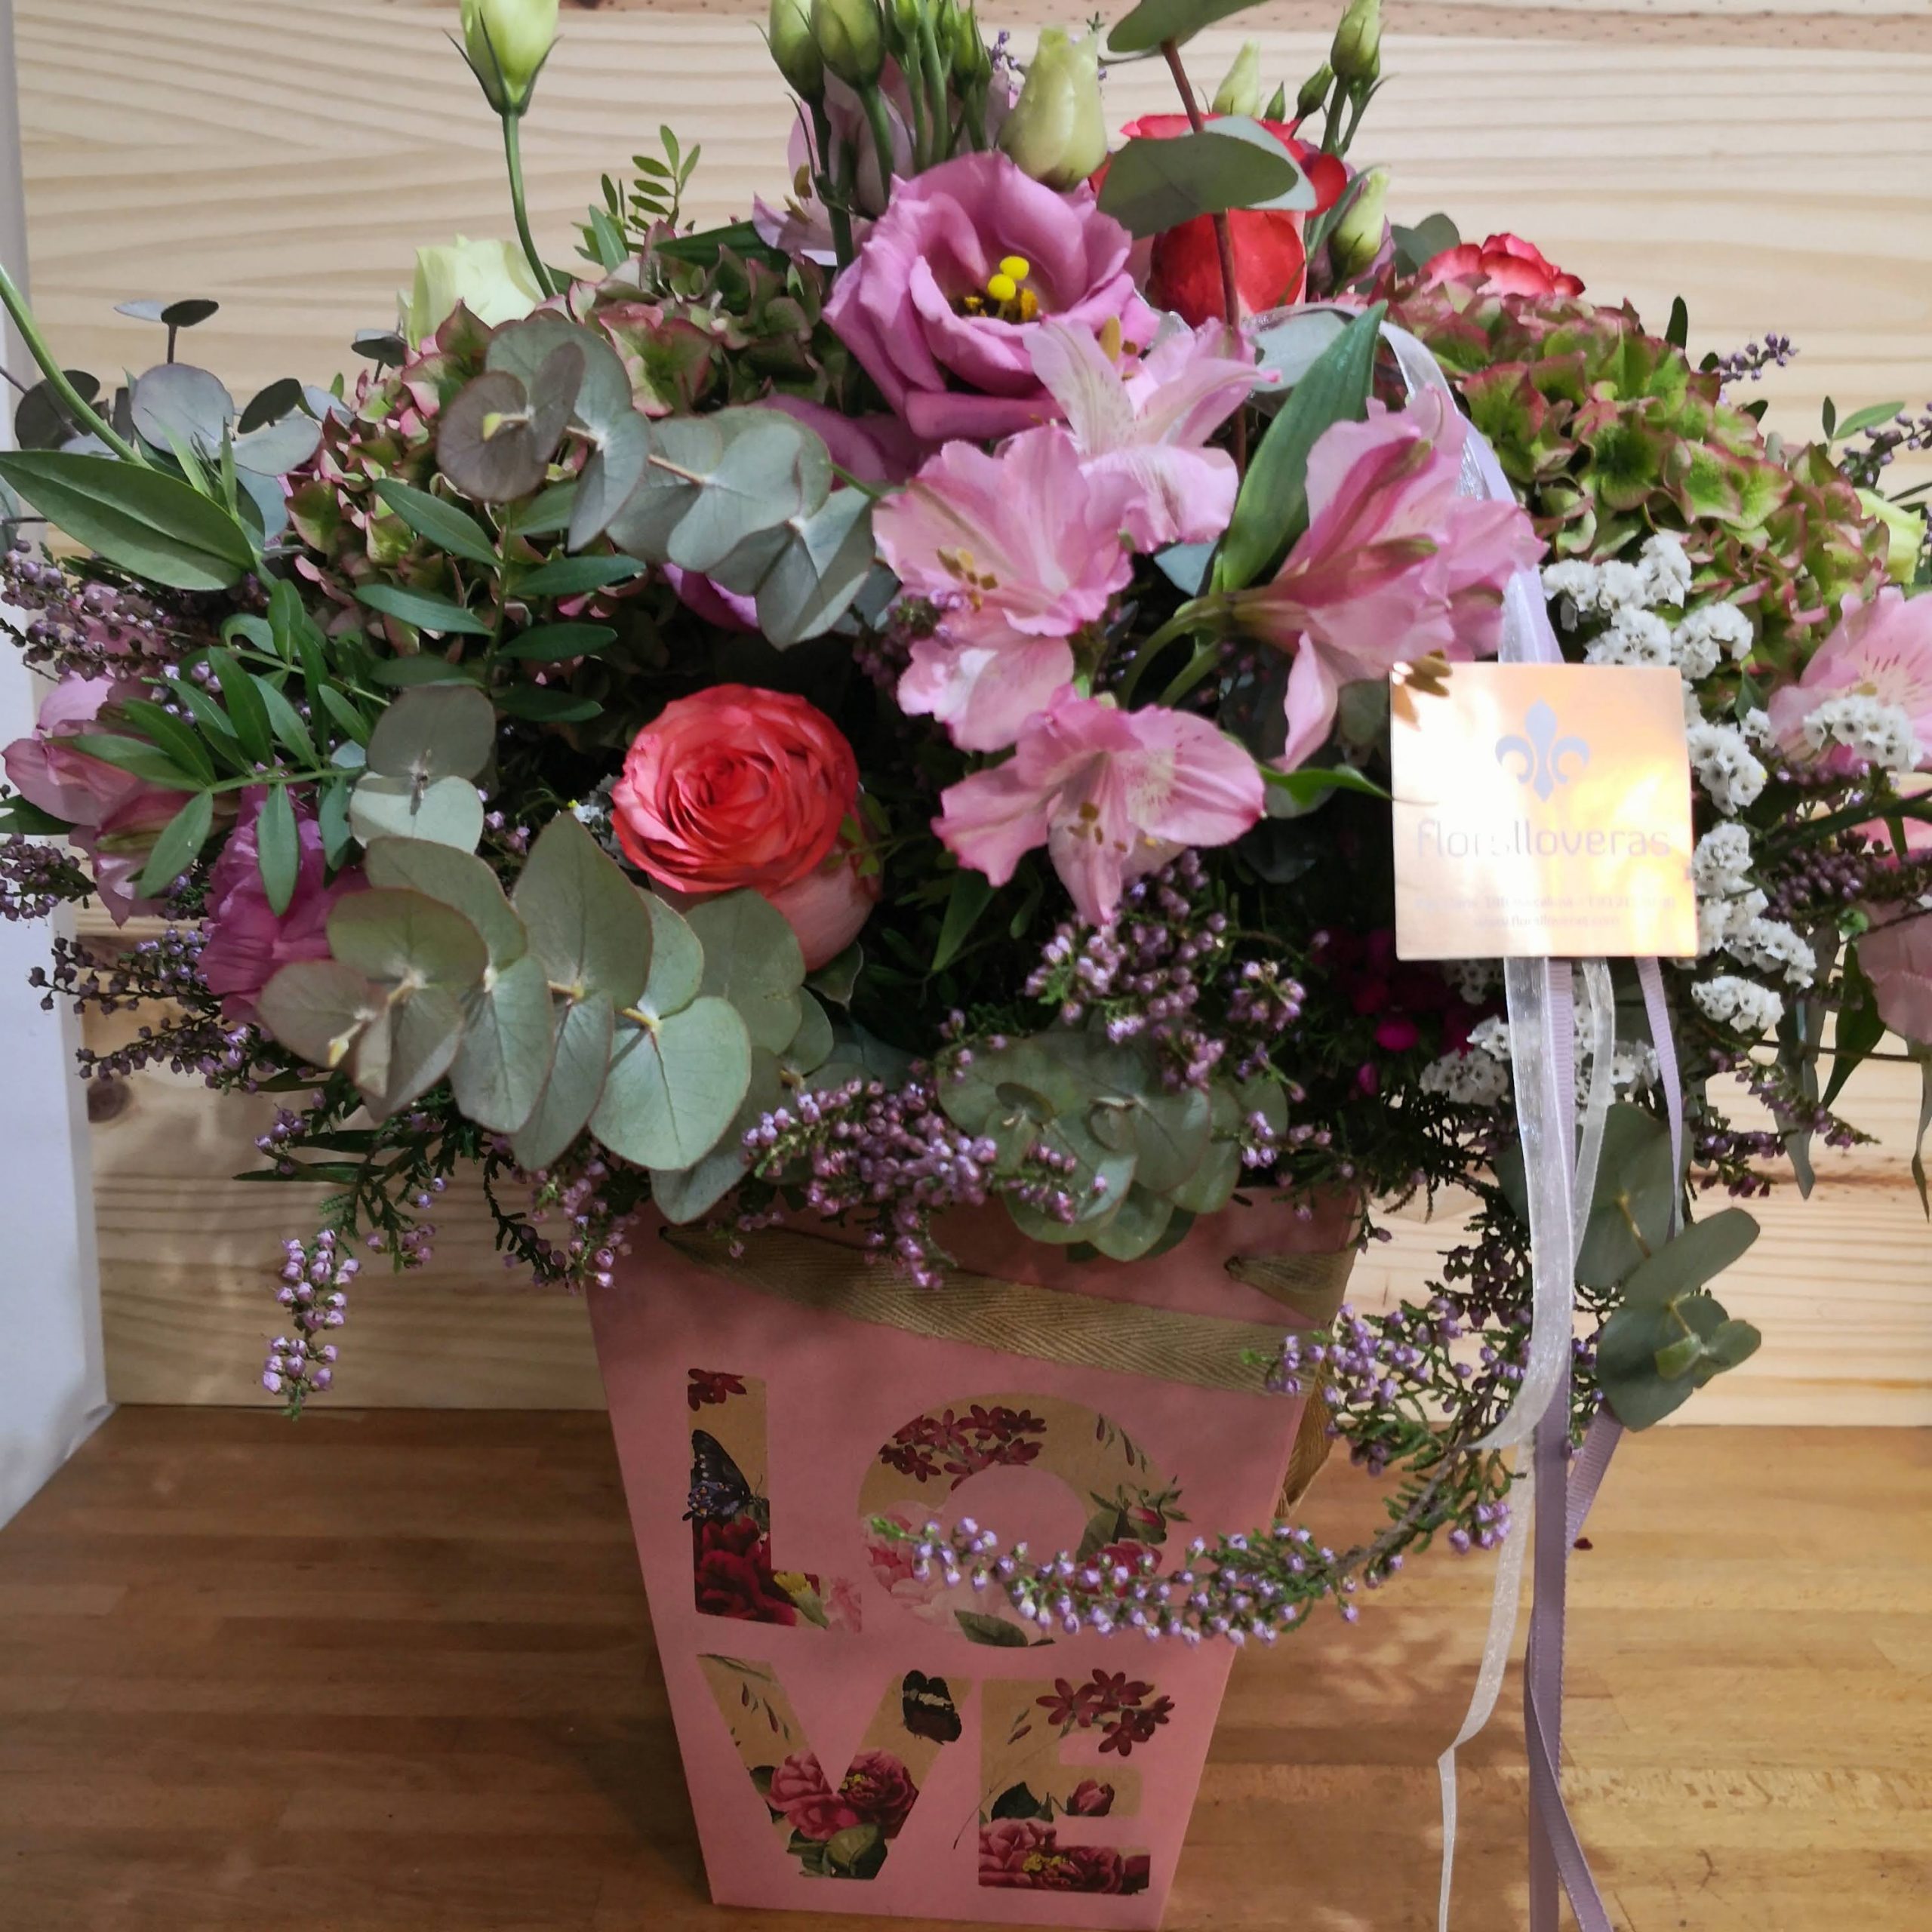 Wild bouquet with decorated box